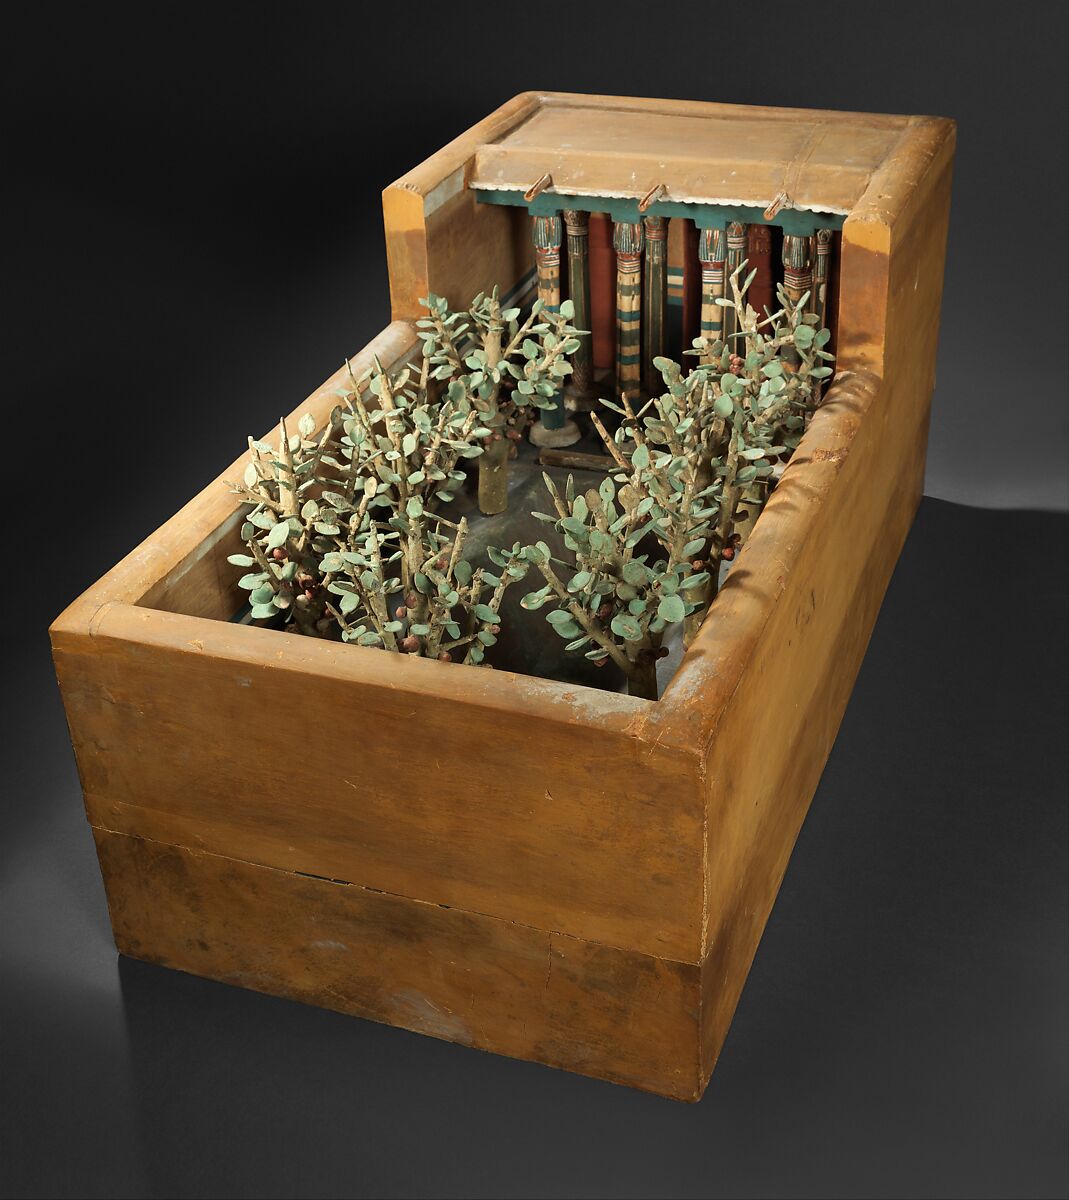 Model of a Porch and Garden, Wood, paint, copper 